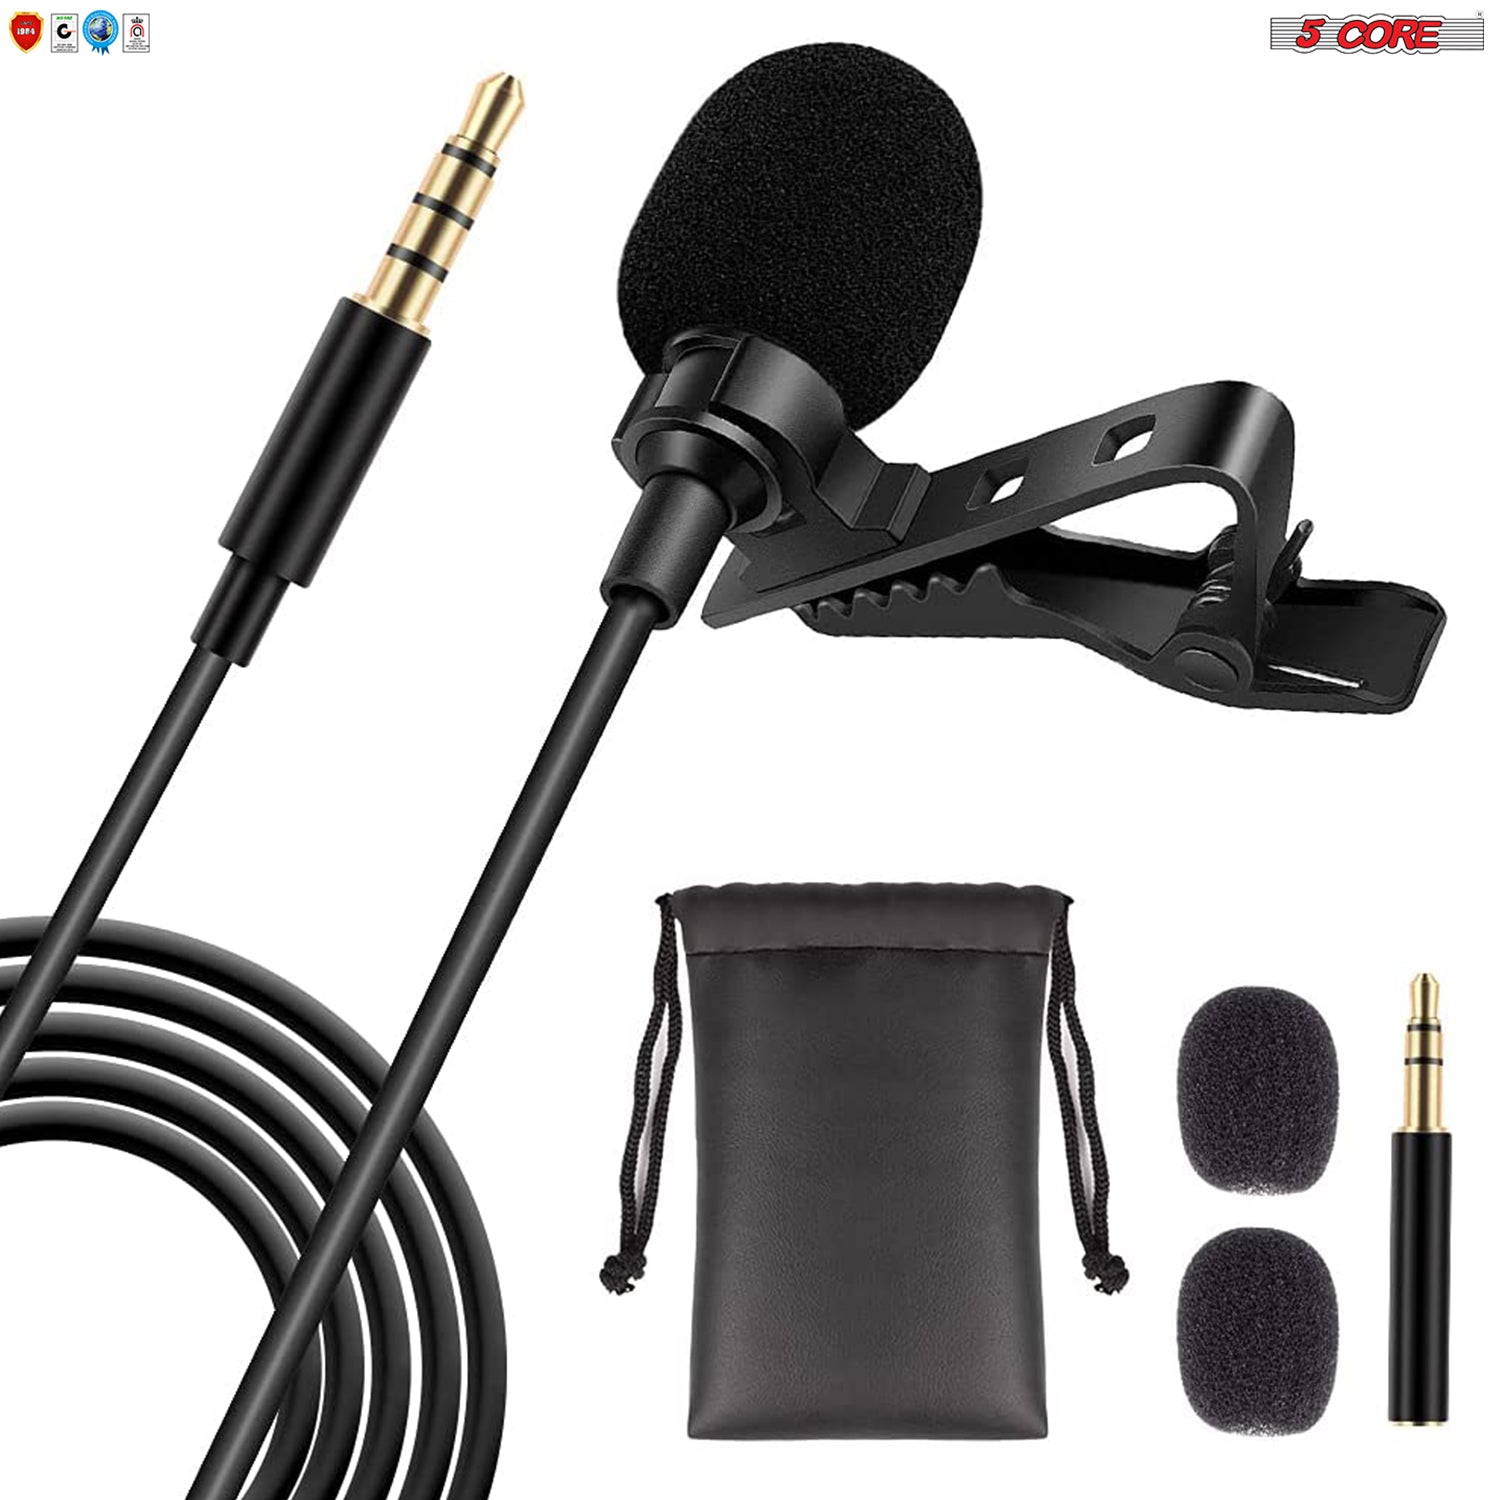 What is a lavalier microphone?